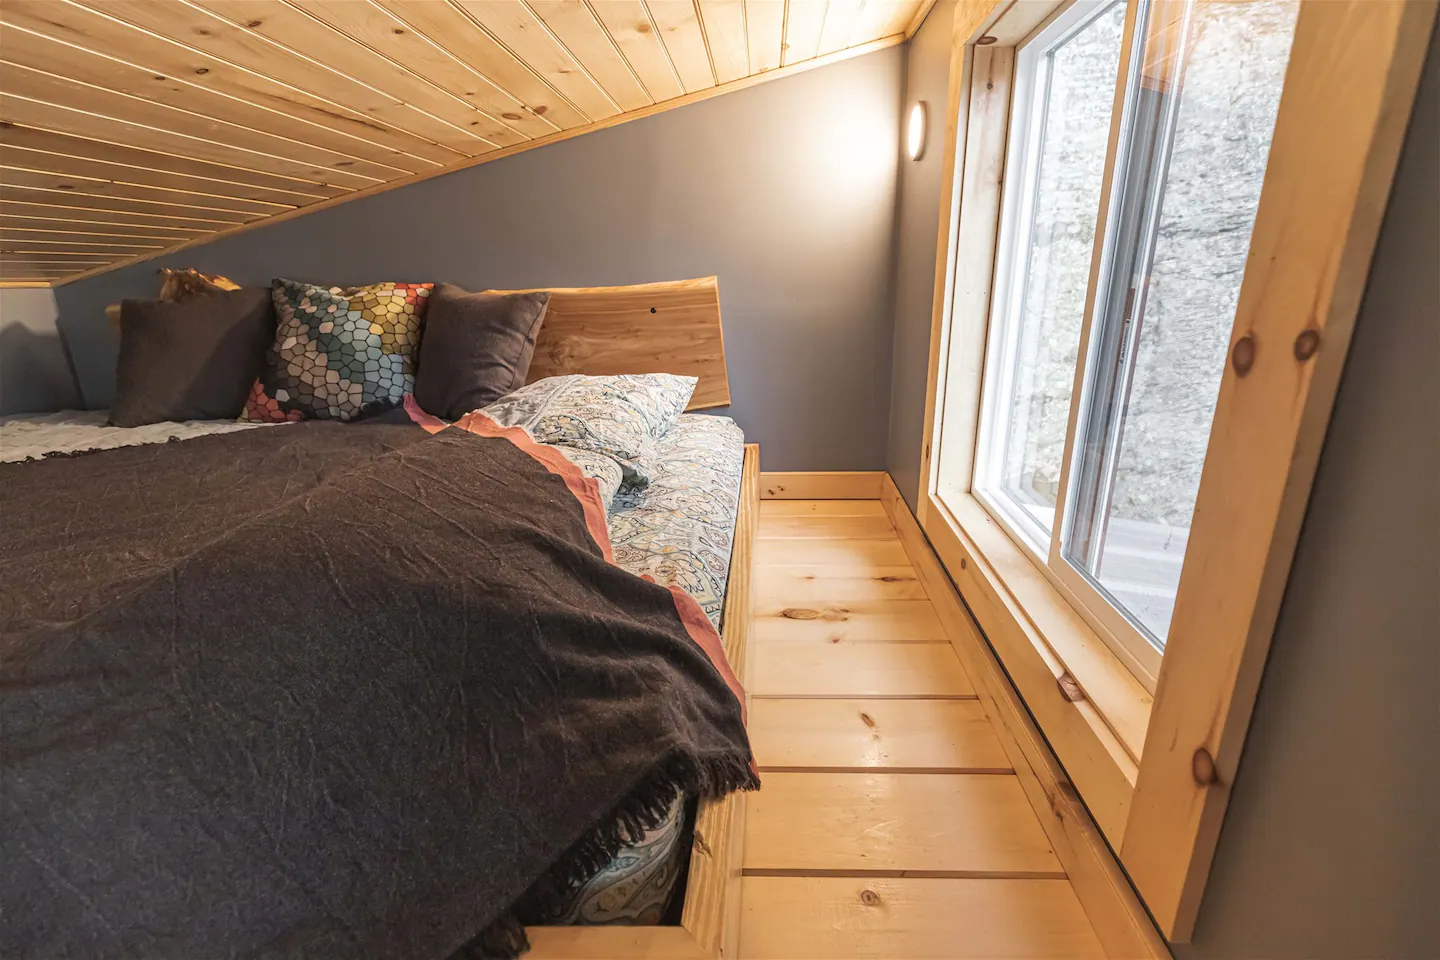 The lofted queen bed is quite comfortable.